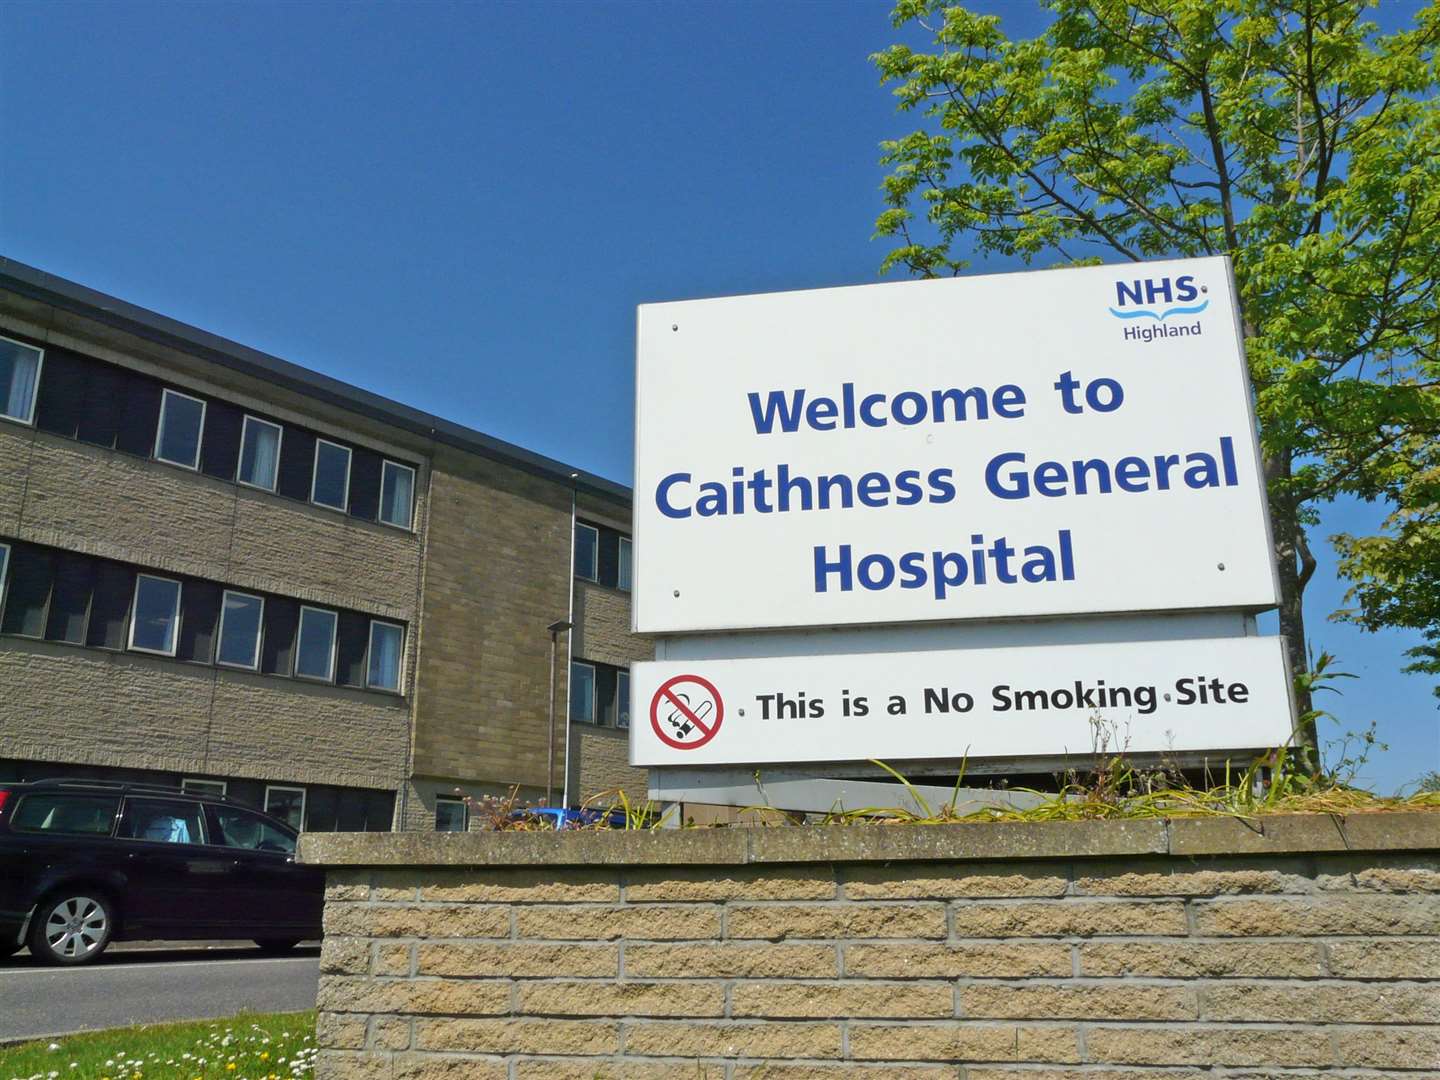 NHS Highland offered an assurance that the change will not impact on the level of care or support provided from Caithness General Hospital.